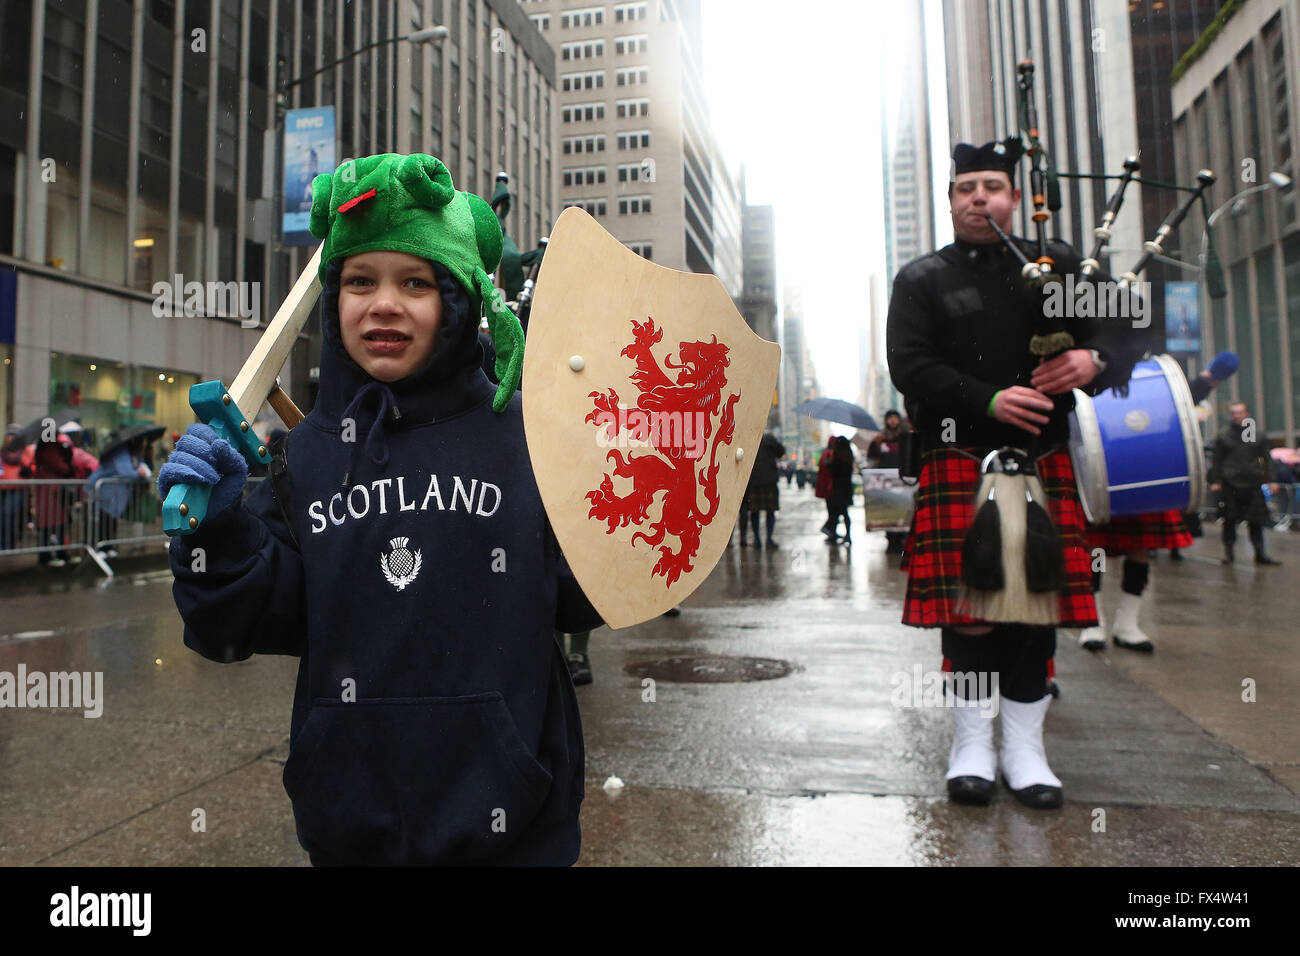 April 9, 2016 - New York City, NY, U.S - A little Scottish warrior leads the Pipes and drums of Tir na nog NYC as they march in the New York Tartan Day Parade, the annual celebration of Scottish heritage and pride in the United States. Thousands of Scots and people of Scottish heritage from across the world descended on the Big Apple for the celebrations, which marked the end of the city's Tartan Week.  The rain didn't stop kilt-wearing bagpipers, drummers, shinty players, Vikings or Scottish Clans from having a great time. (Credit Image: © Krista Kennell via ZUMA Wire) Stock Photo